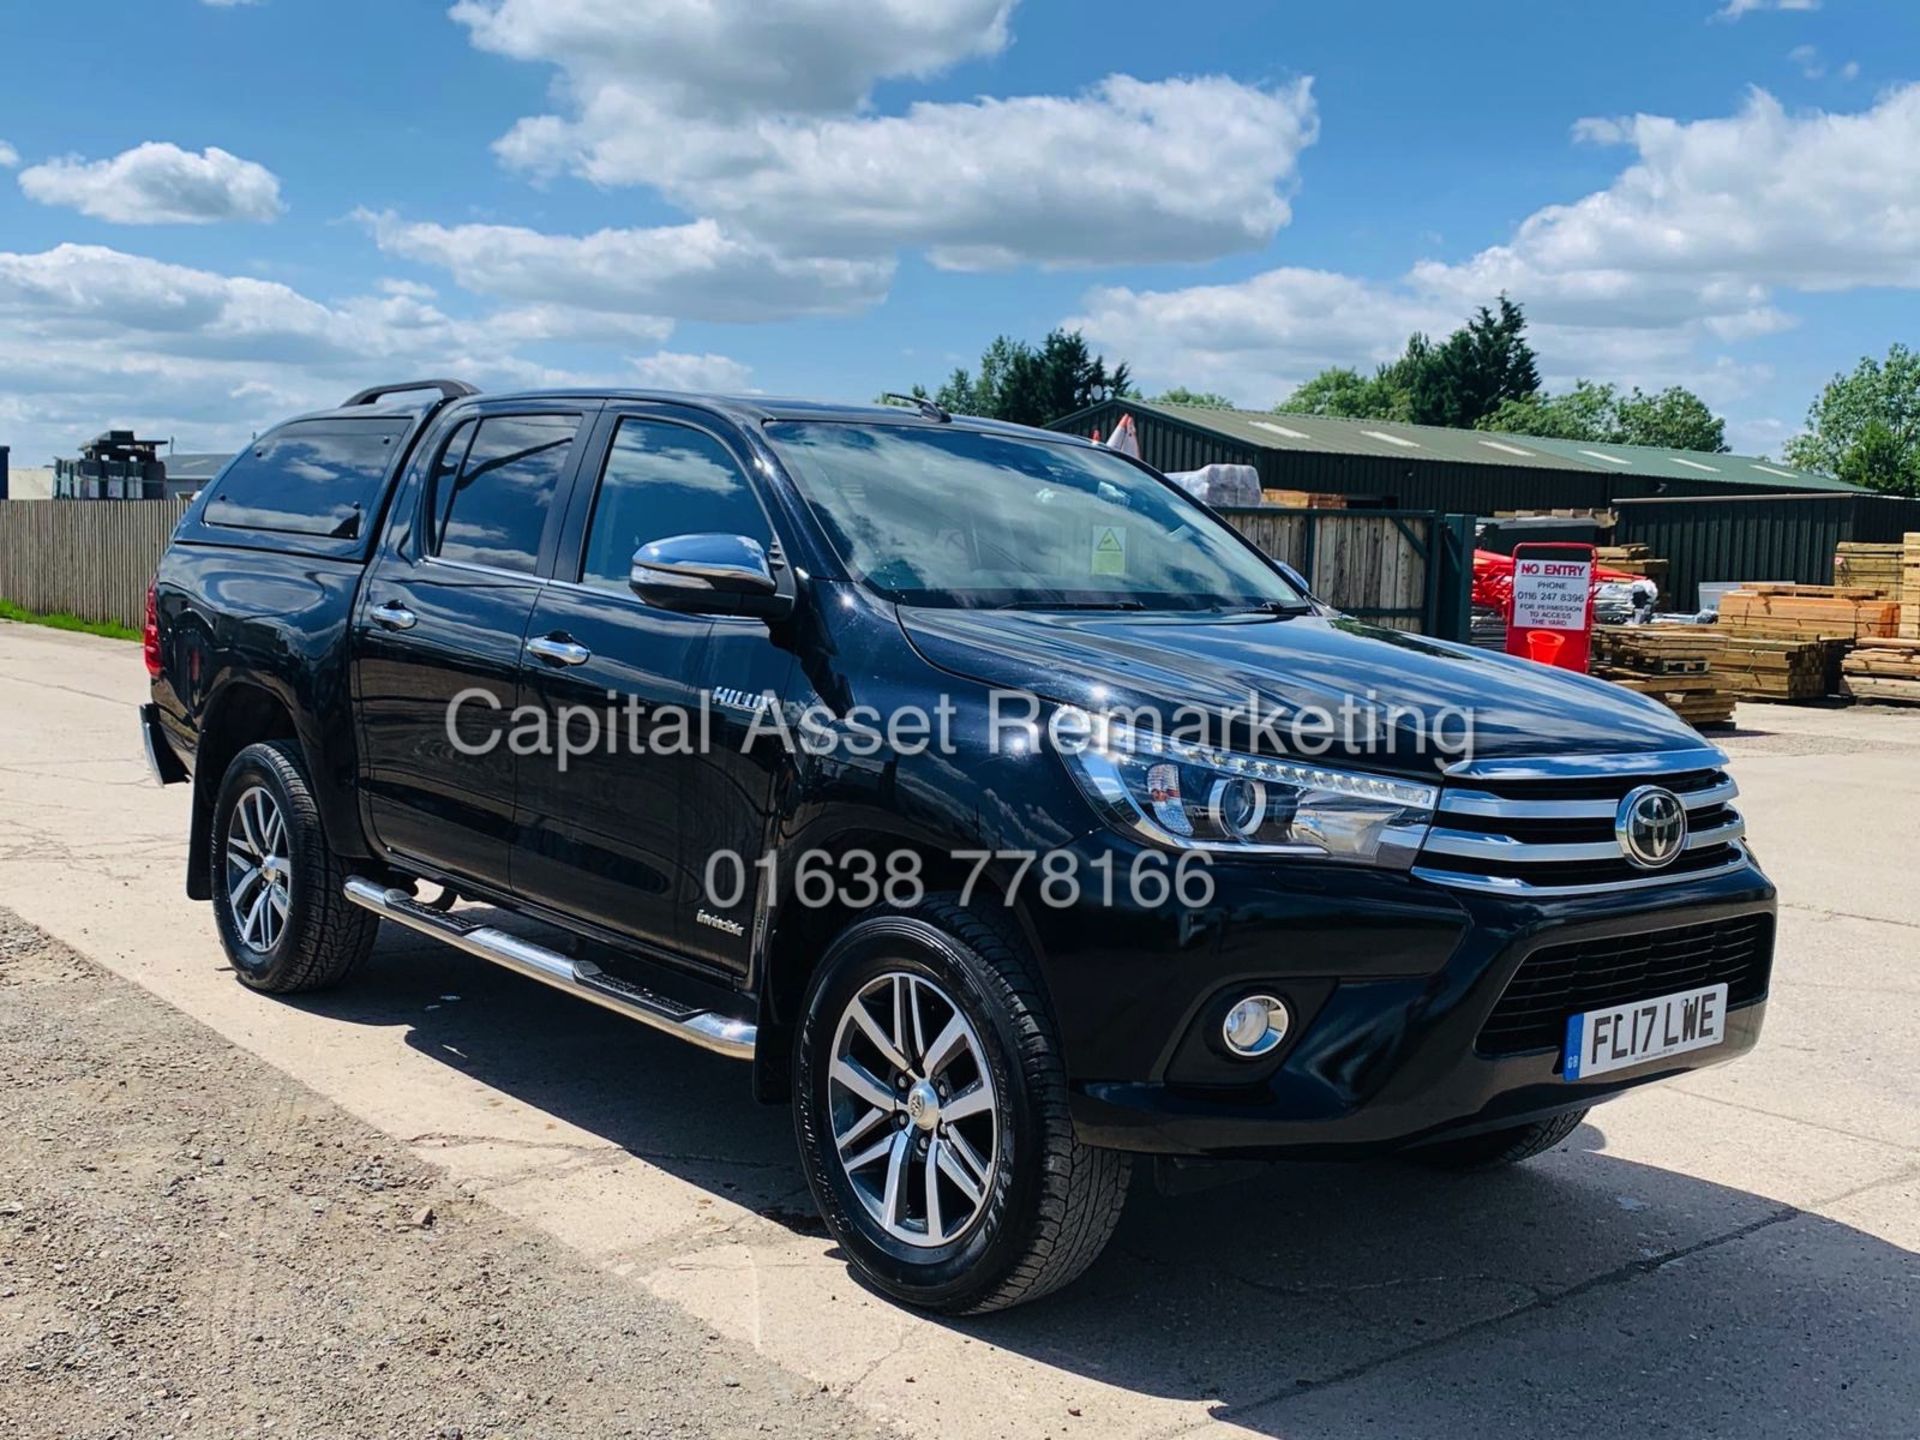 TOYOTA HILUX INVINCIBLE 2.4d4d "AUTO" D/CAB (17 REG - NEW SHAPE) 1 OWNER FSH *SAT NAV* FULLY LOADED - Image 7 of 52